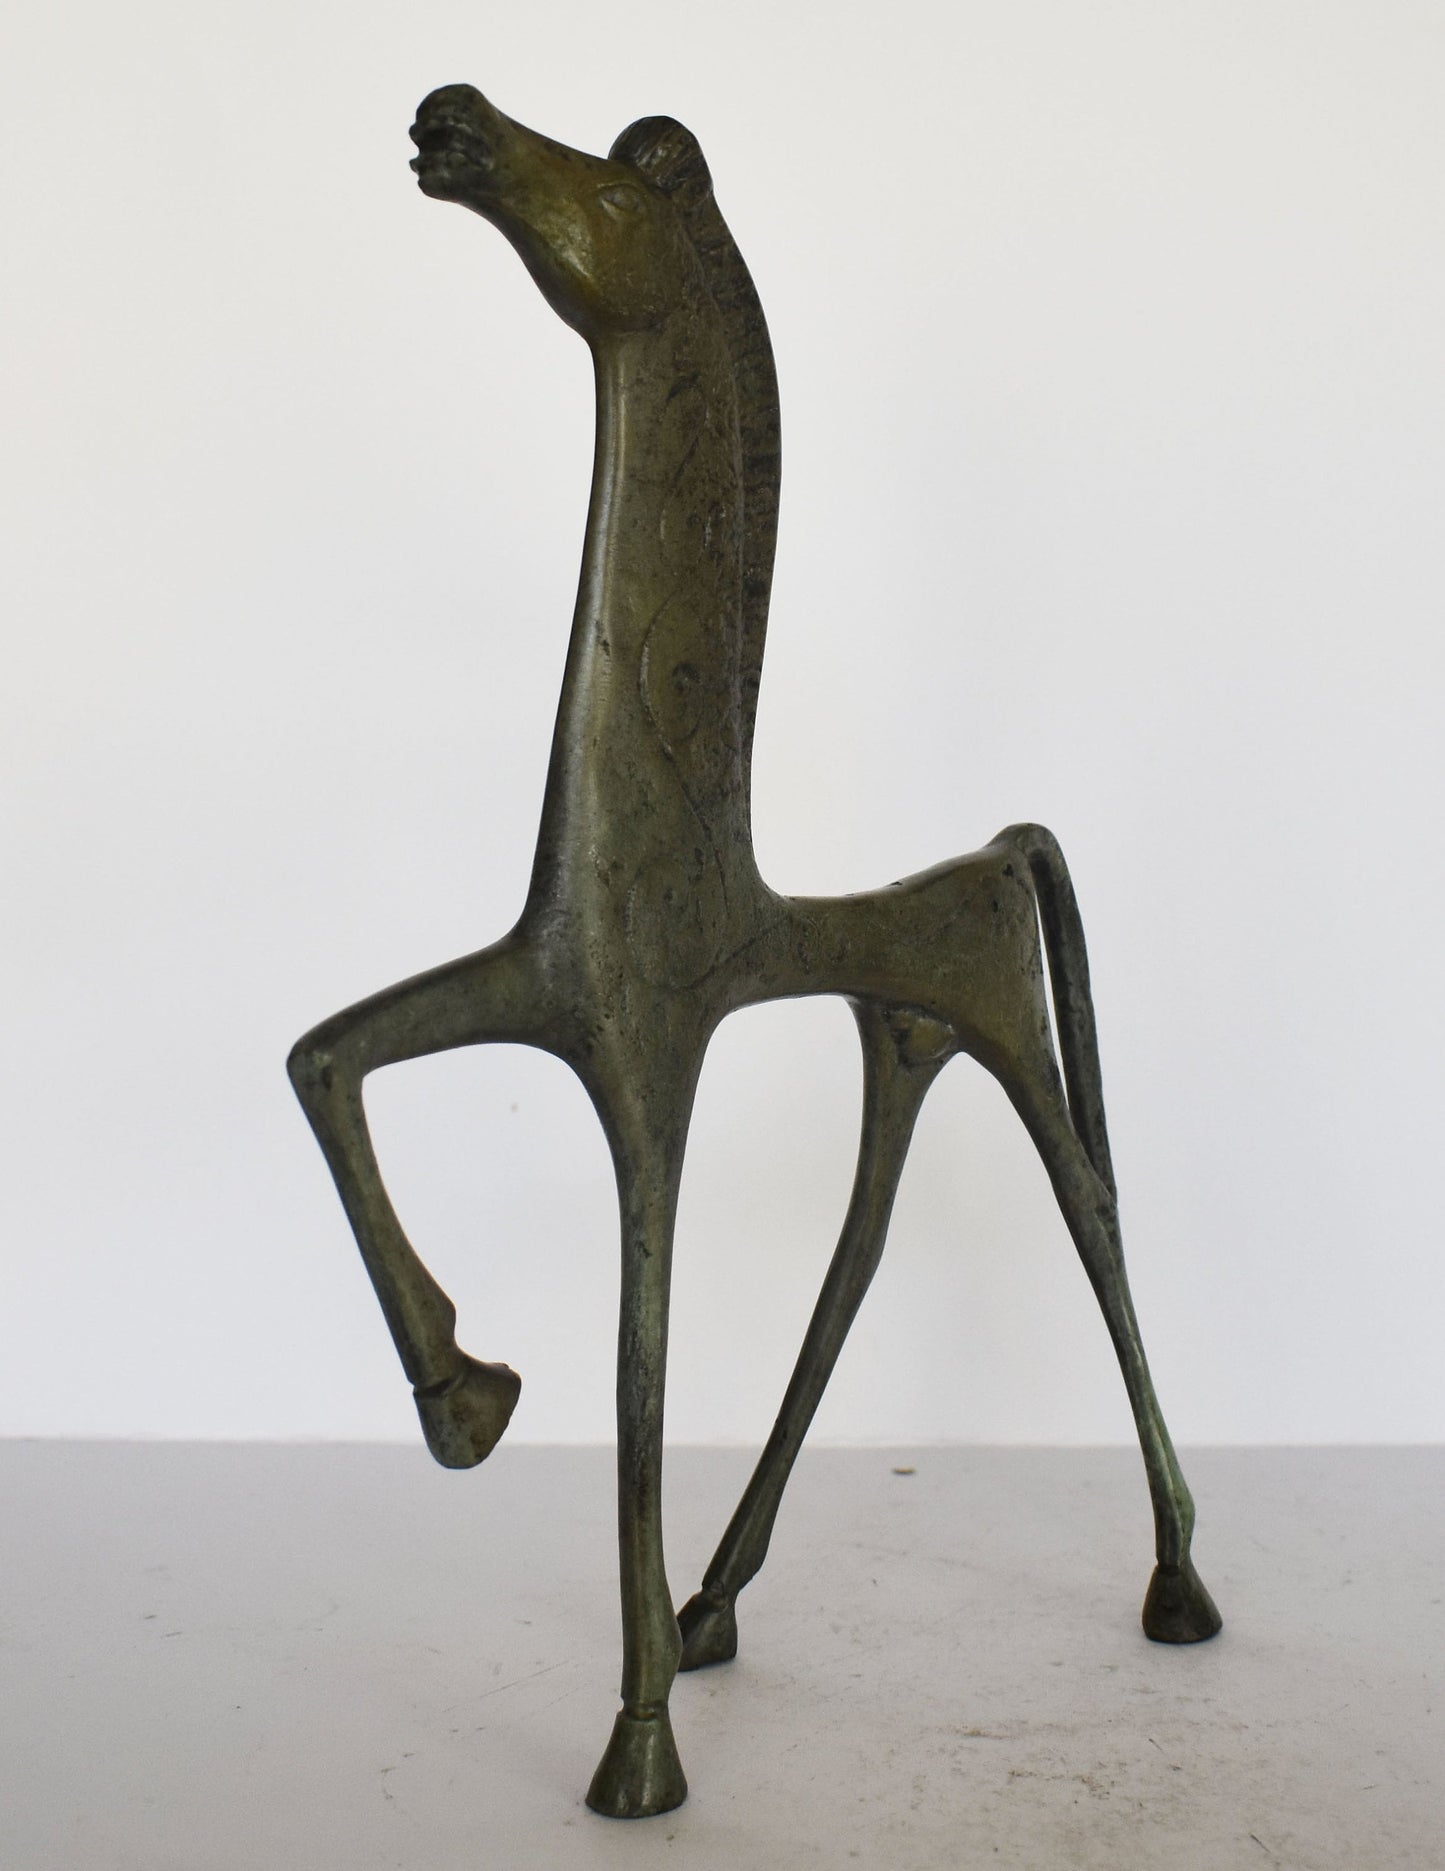 Ancient Greek Horse - pure Bronze Sculpture - Quality Art - Symbol of Wealth and Prosperity